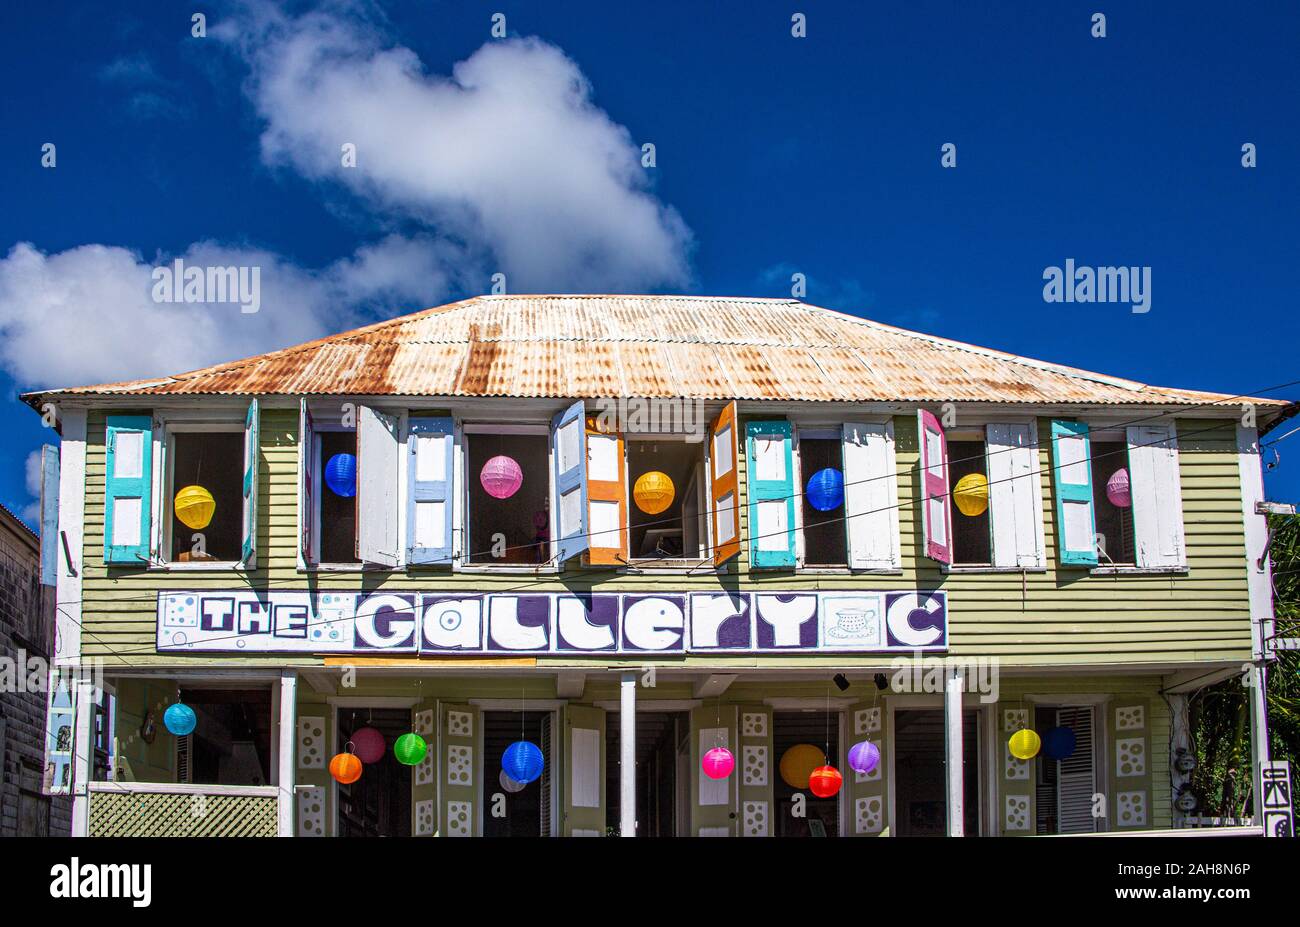 The Gallery C on St Kitts Stock Photo